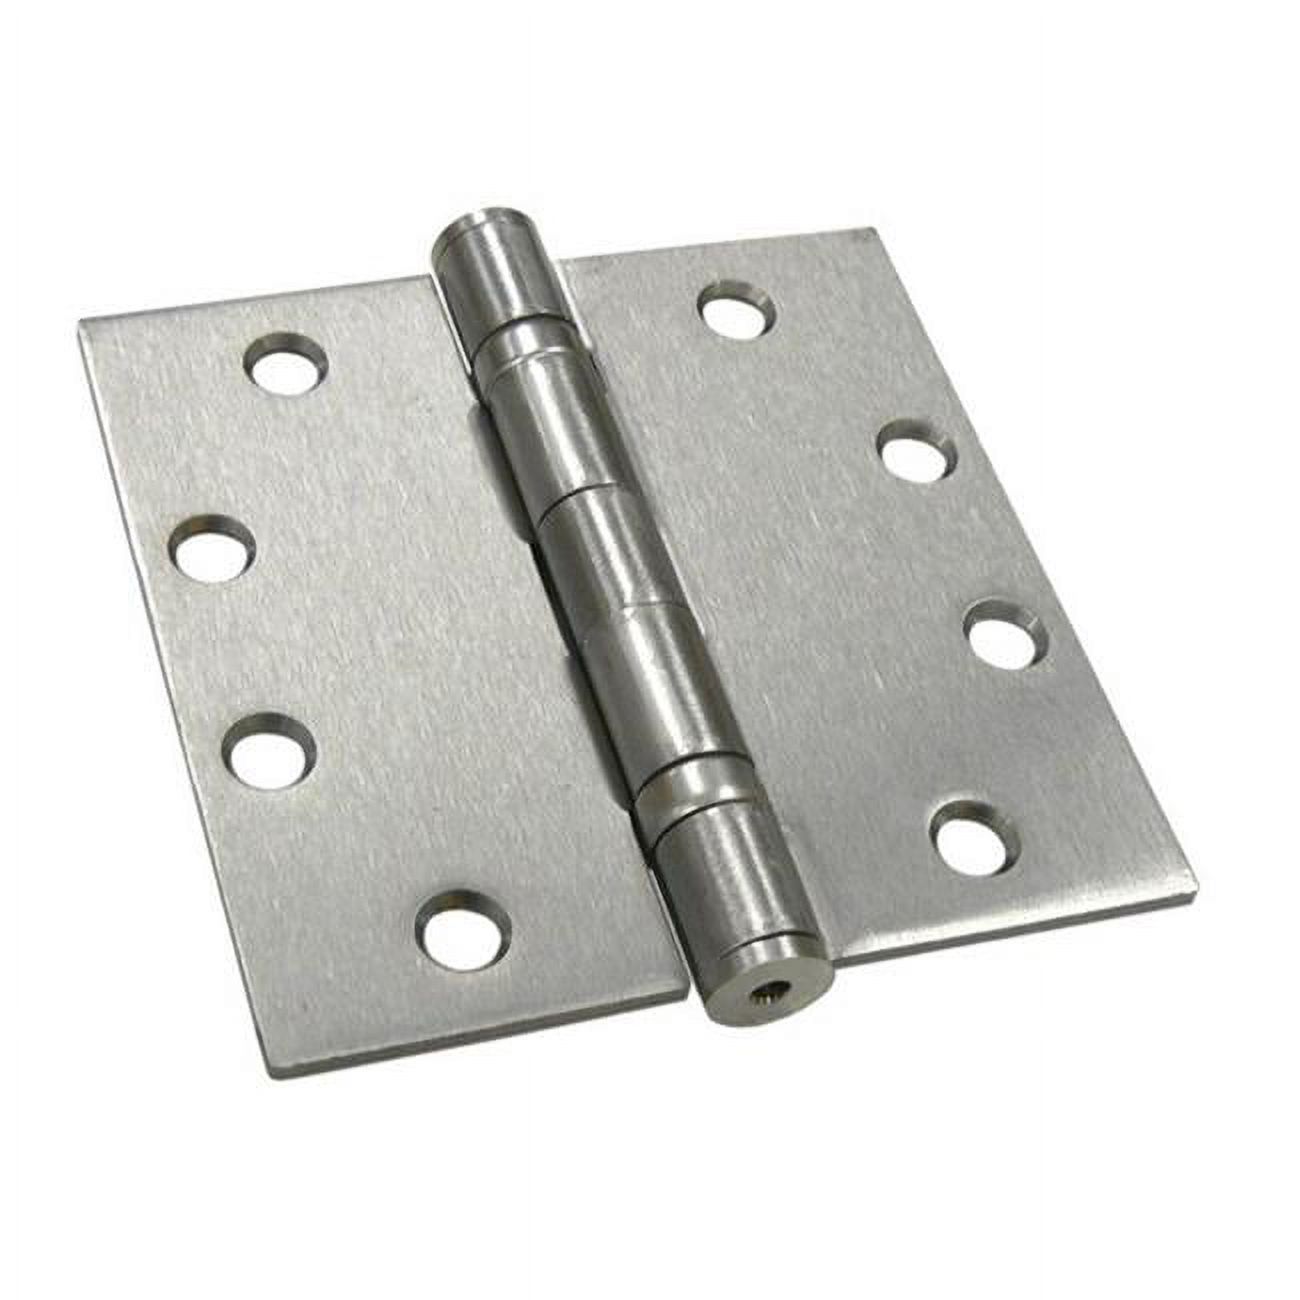 4.5 x 4.5 in. Heavy Duty Square Ball Bearings Hinge, Satin Chrome - Steel - 30 Case - Pack of 2 - image 1 of 1